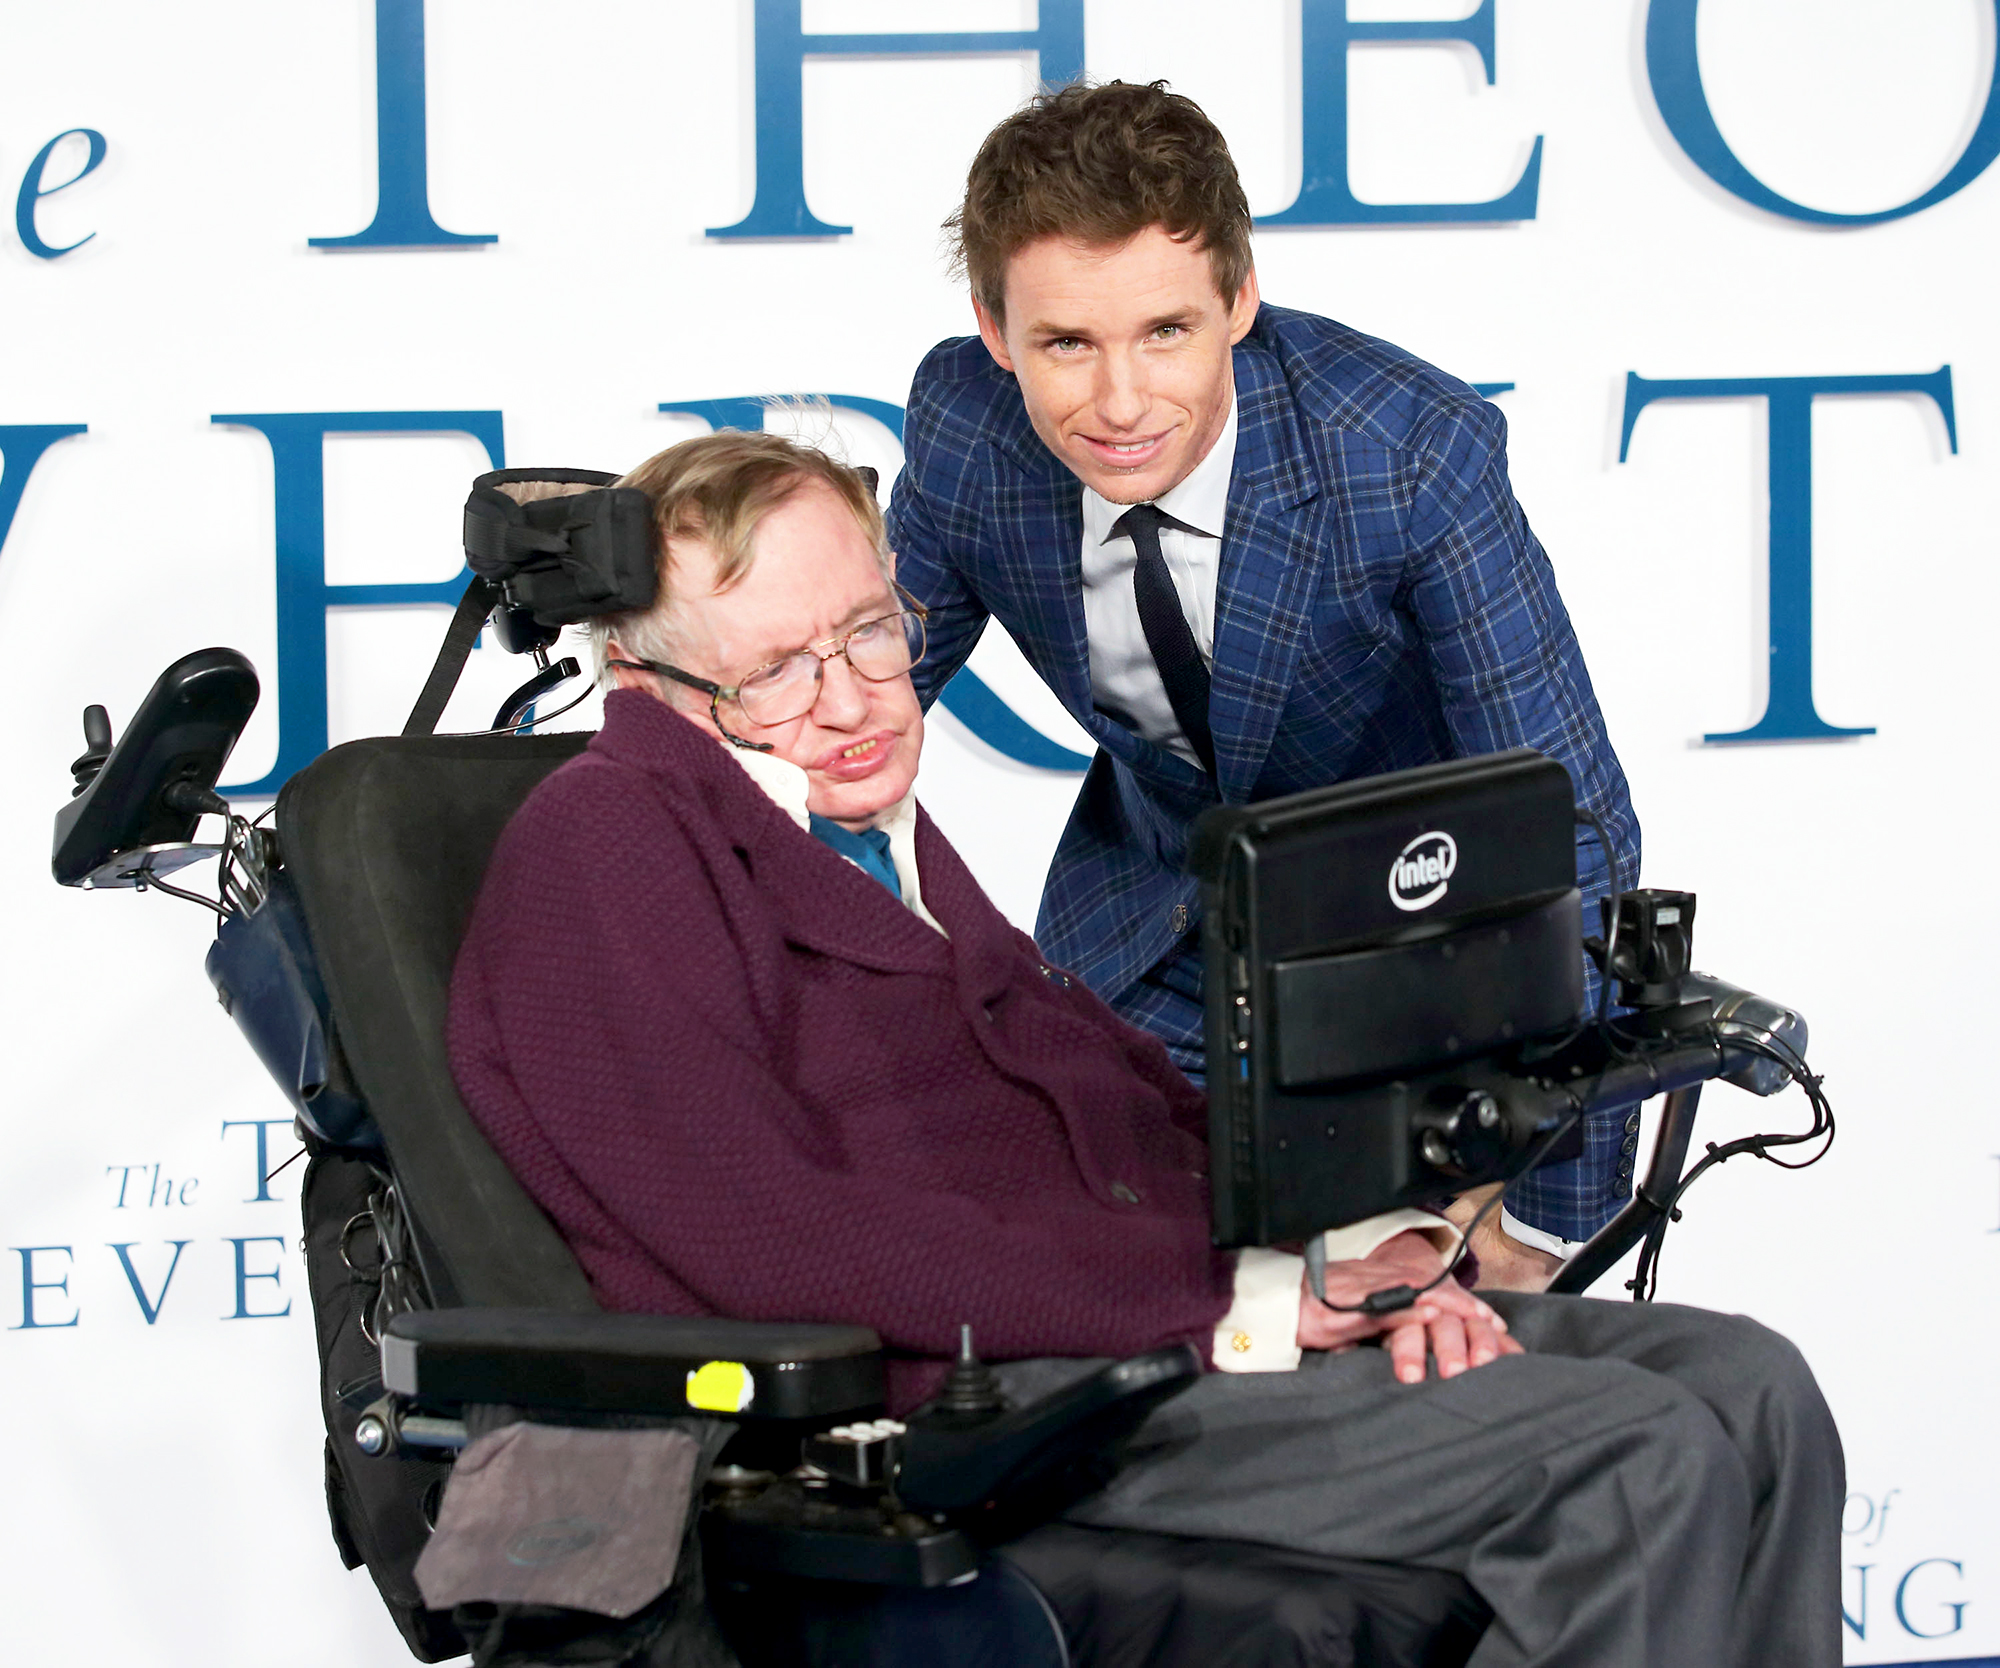 Stephen Hawking set for 'geekcom' role in US sitcom The Big Bang